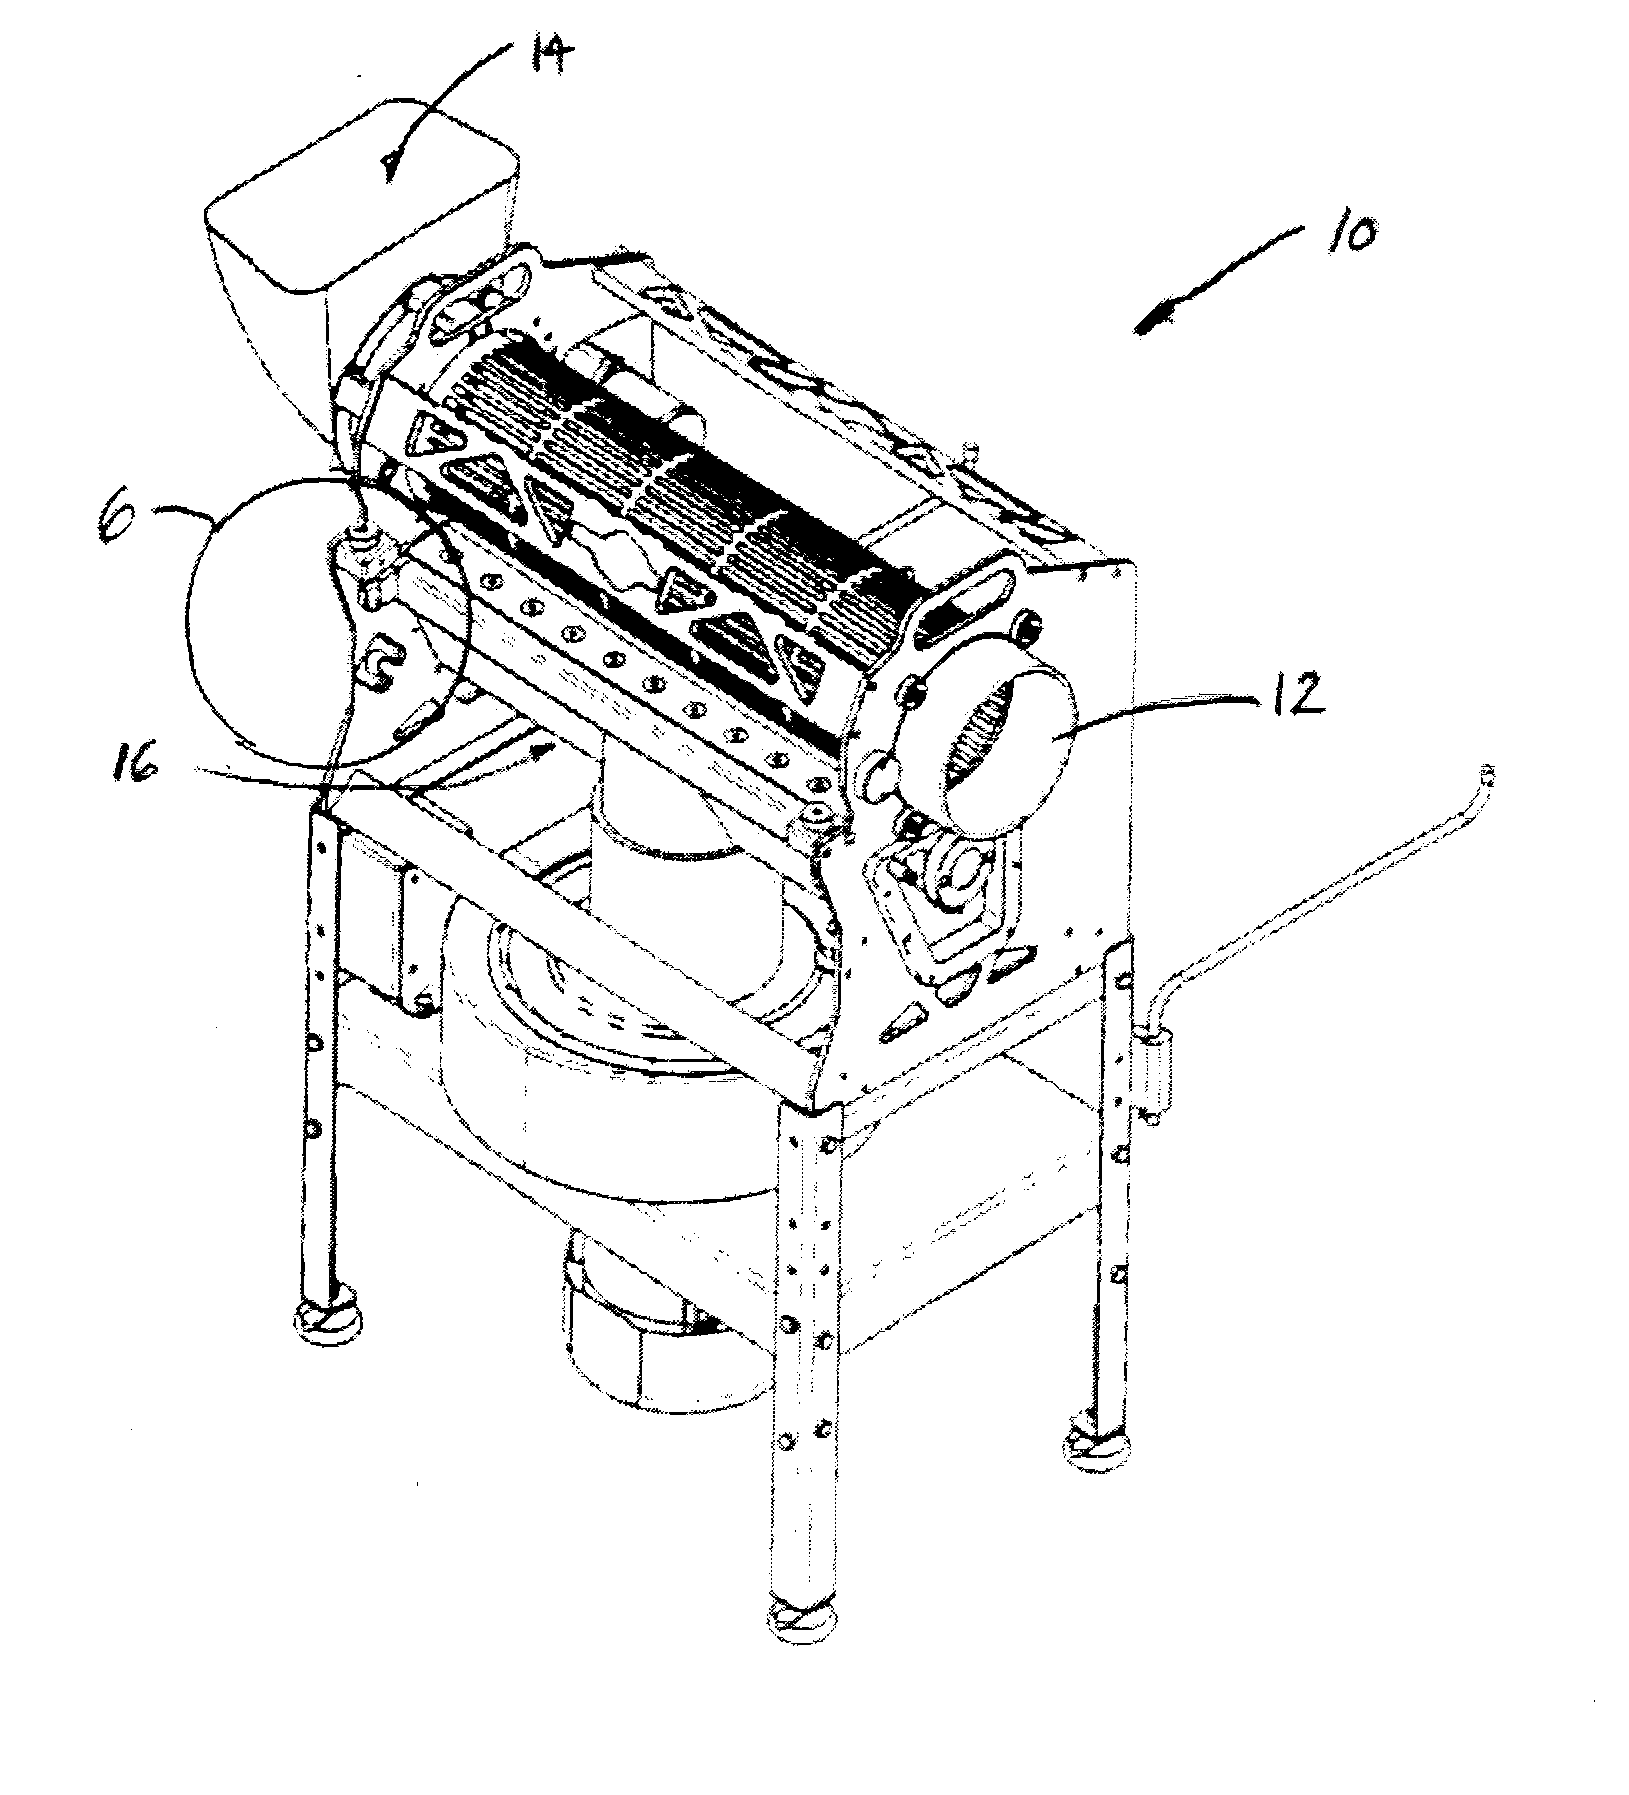 Blade mechanism for a plant material trimming device